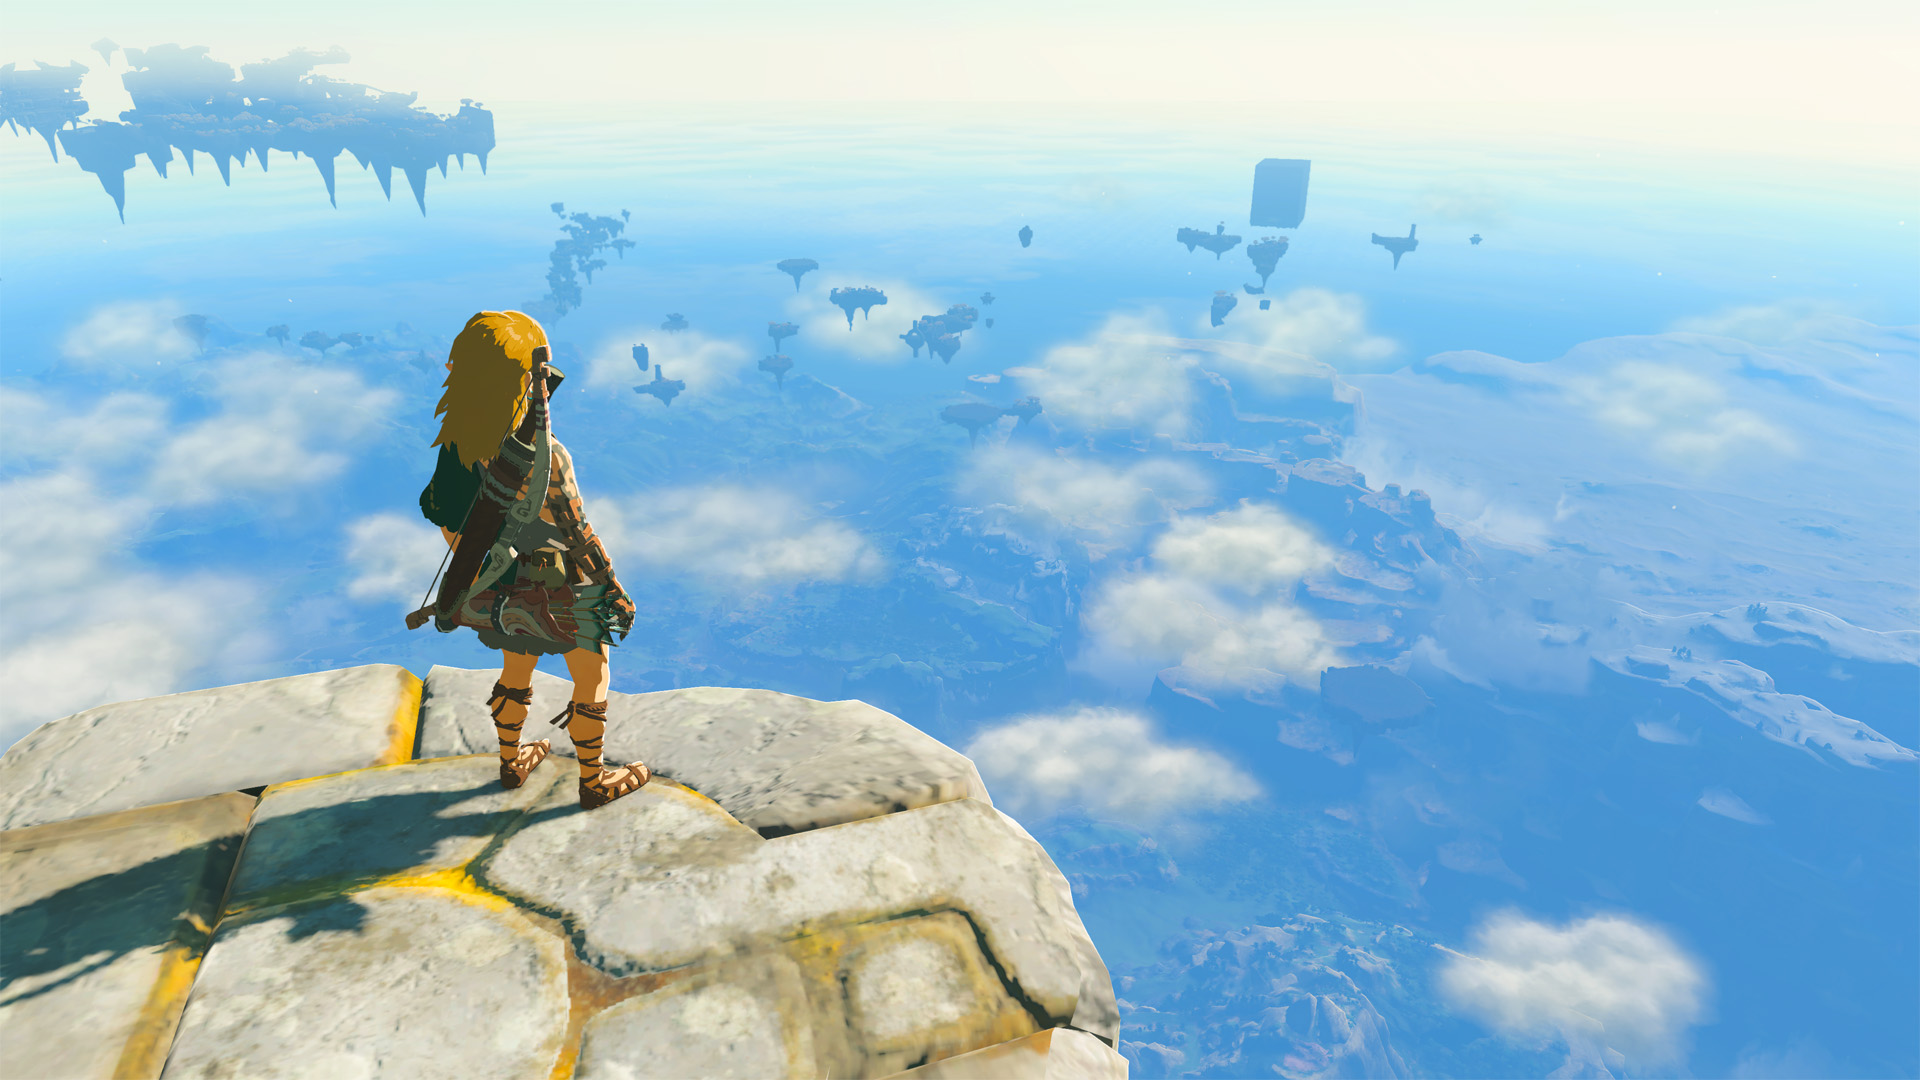 How Tears of the Kingdom's map compares to Breath of the Wild